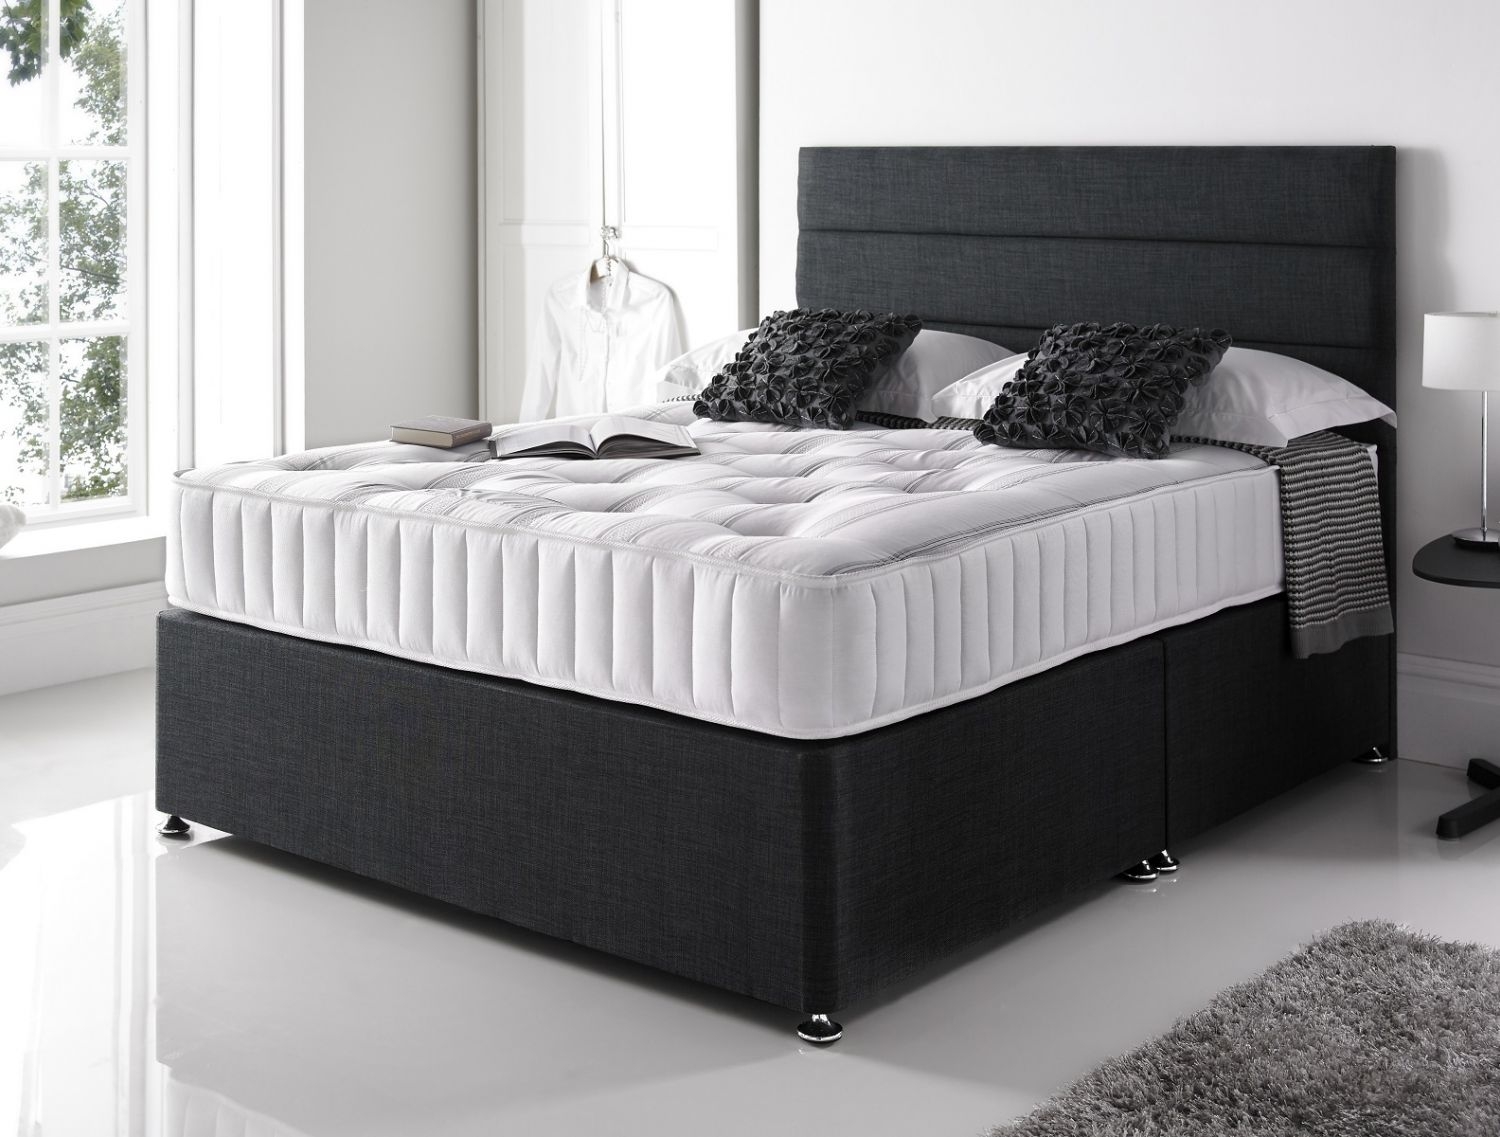 Antarctic Linen Divan Bed – Single, Small Double, Double, King & Super King Sizes Available – Headboard & Mattress Included